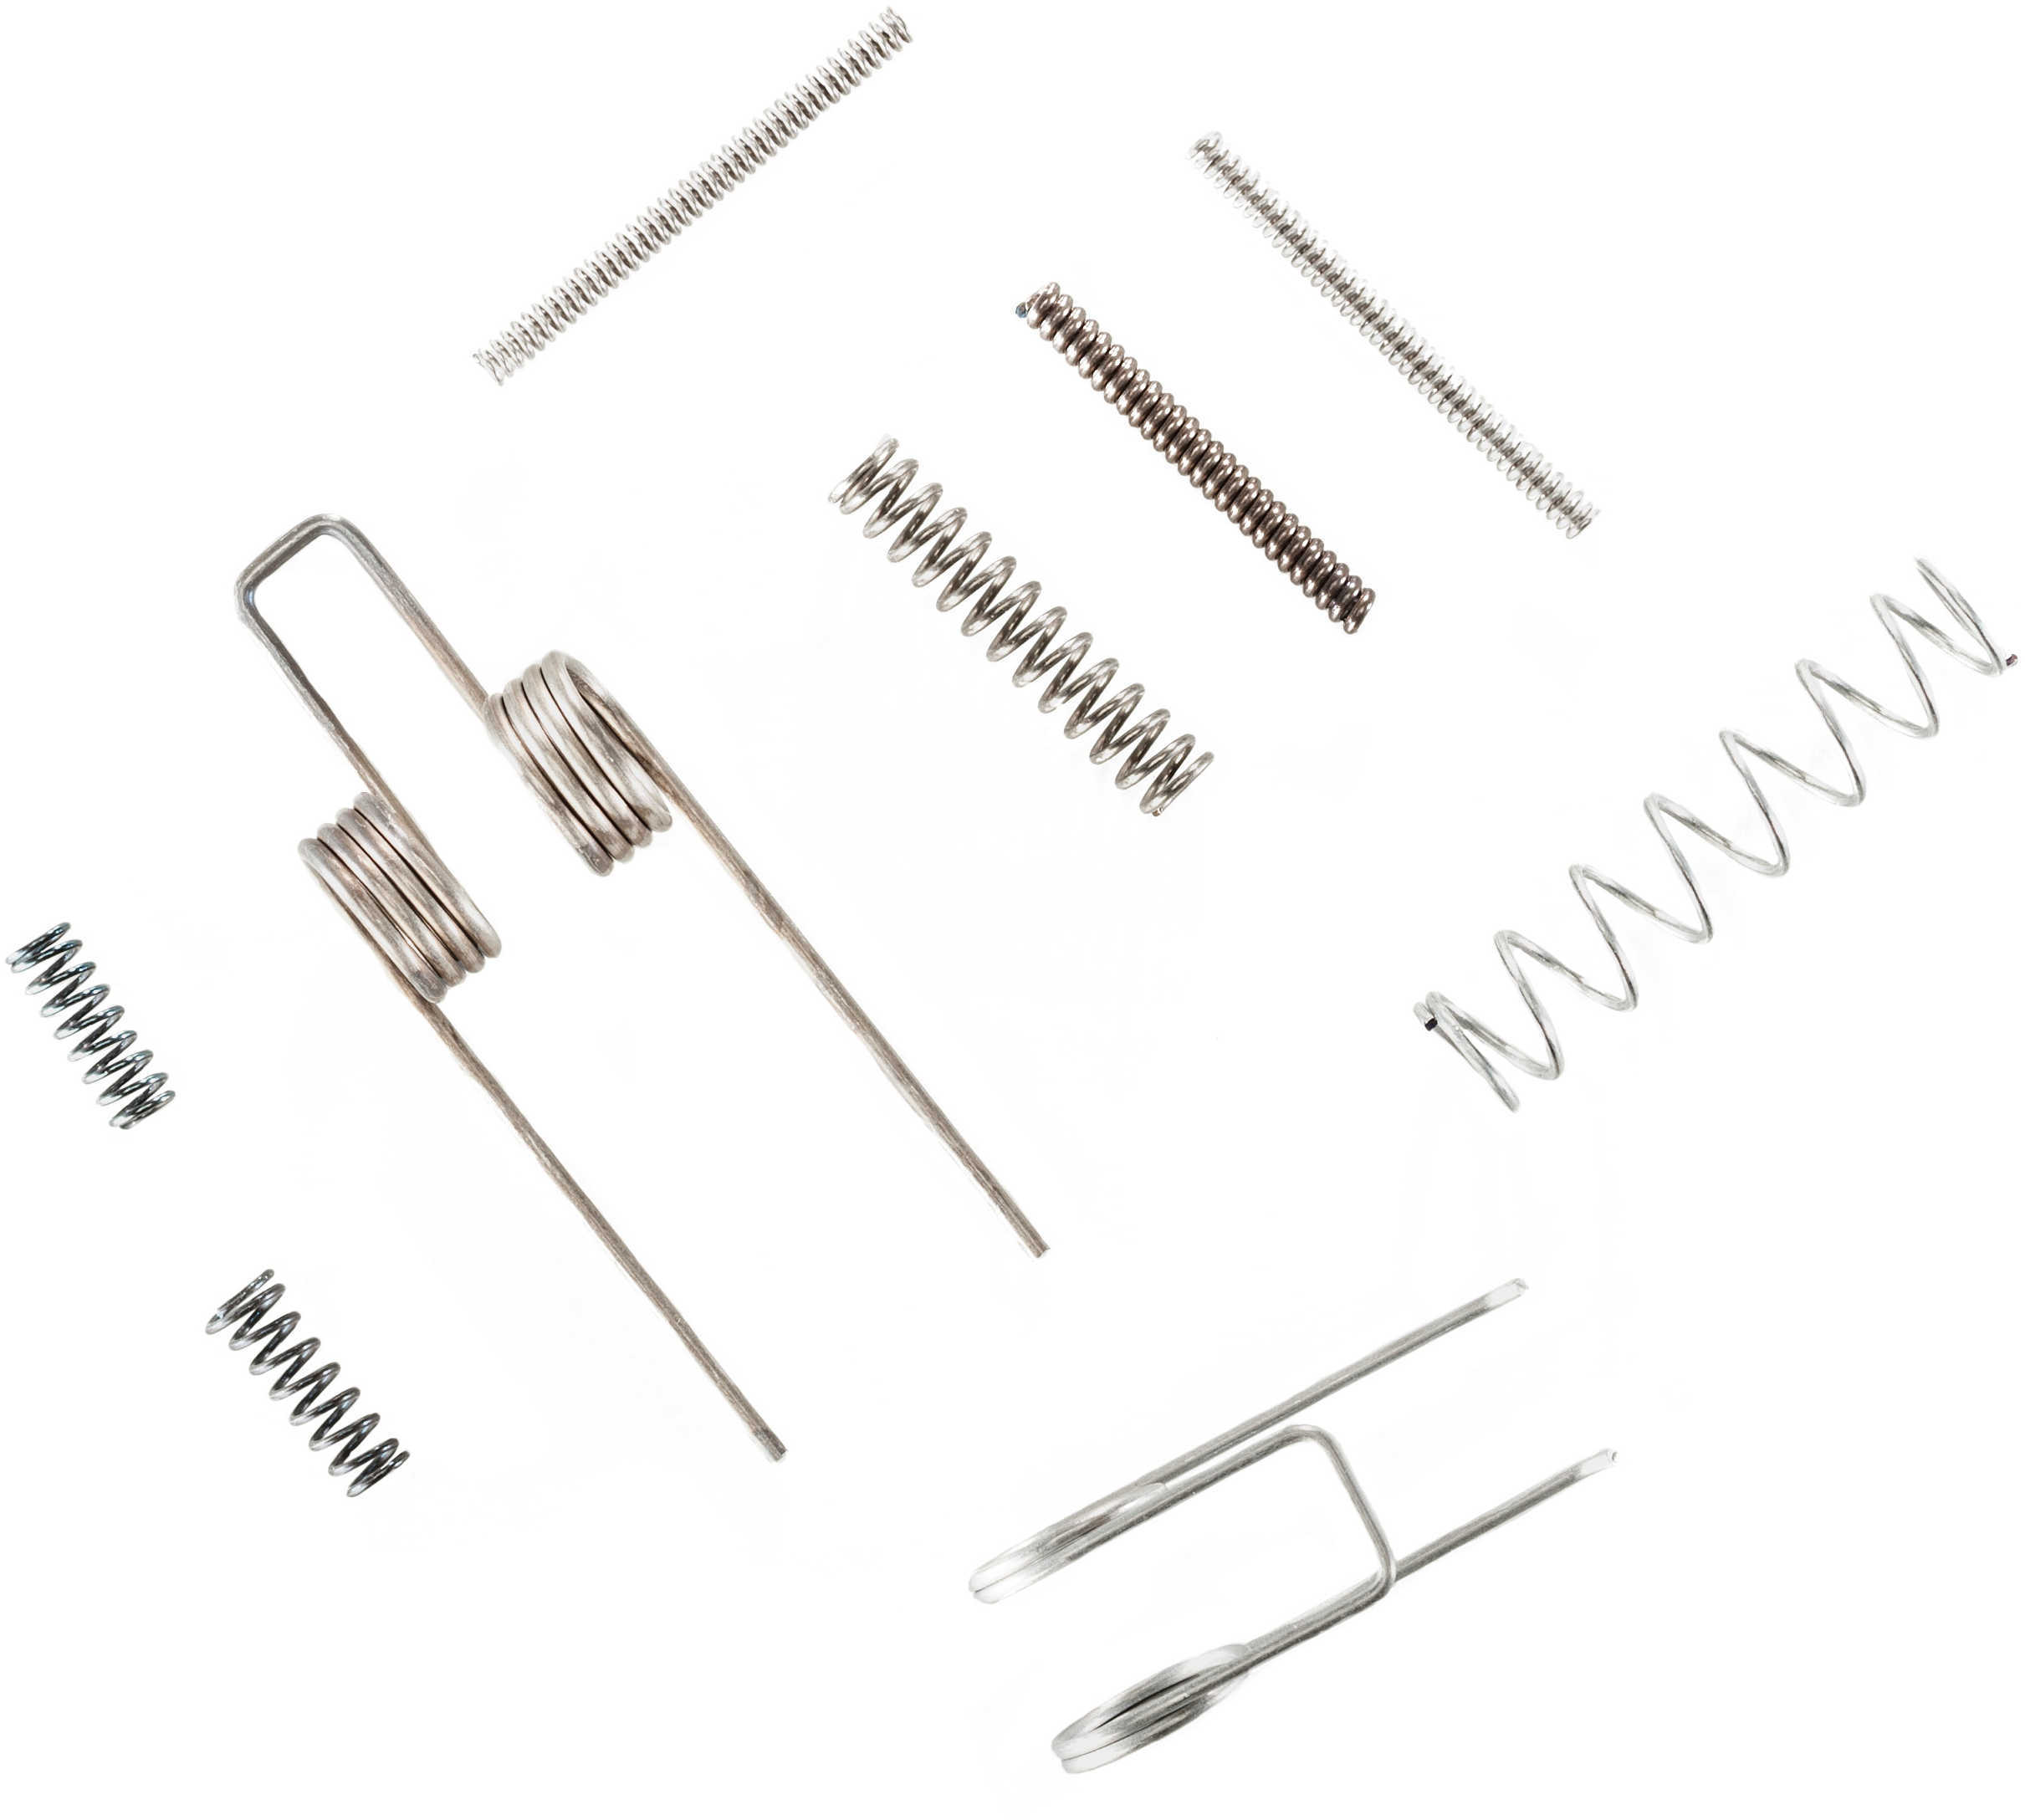 Ergo Grips AR-15 Lower 9 Piece Spring Replacement Kit